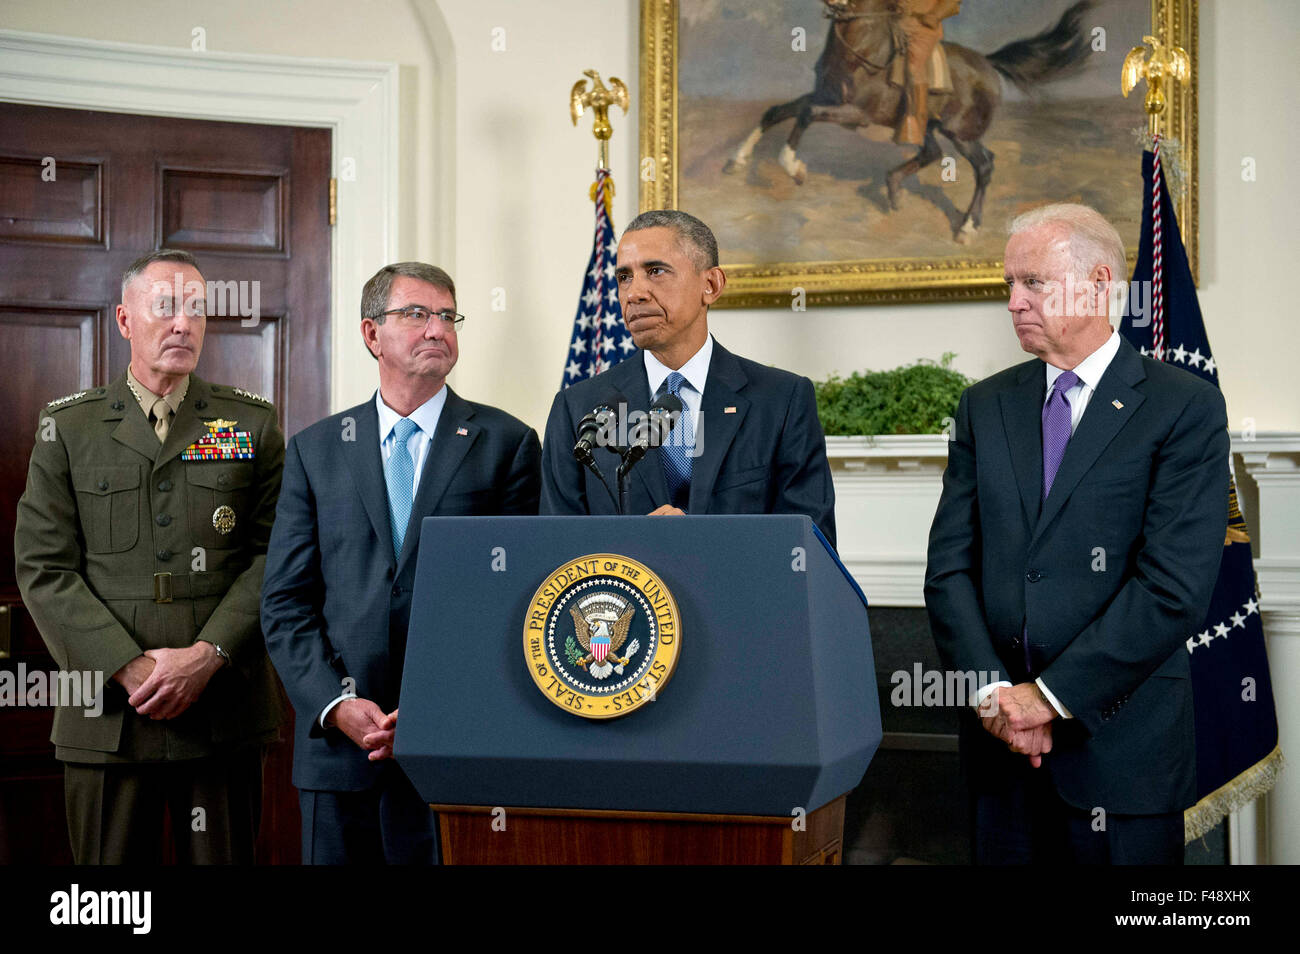 United States President Barack Obama announces he will keep 5,500 US troops in Afghanistan when he leaves office in 2017 and explains his reasoning for that action in the Roosevelt Room of the White House in Washington, DC on Thursday, October 15, 2015. From left to right: US Marine Corps General Joseph F. Dunford, Chairman, Joint Chiefs of Staff; US Secretary of Defense Ashton Carter; the President, and US Vice President Joe Biden. Credit: Ron Sachs/Pool via CNP - NO WIRE SERVICE - Stock Photo